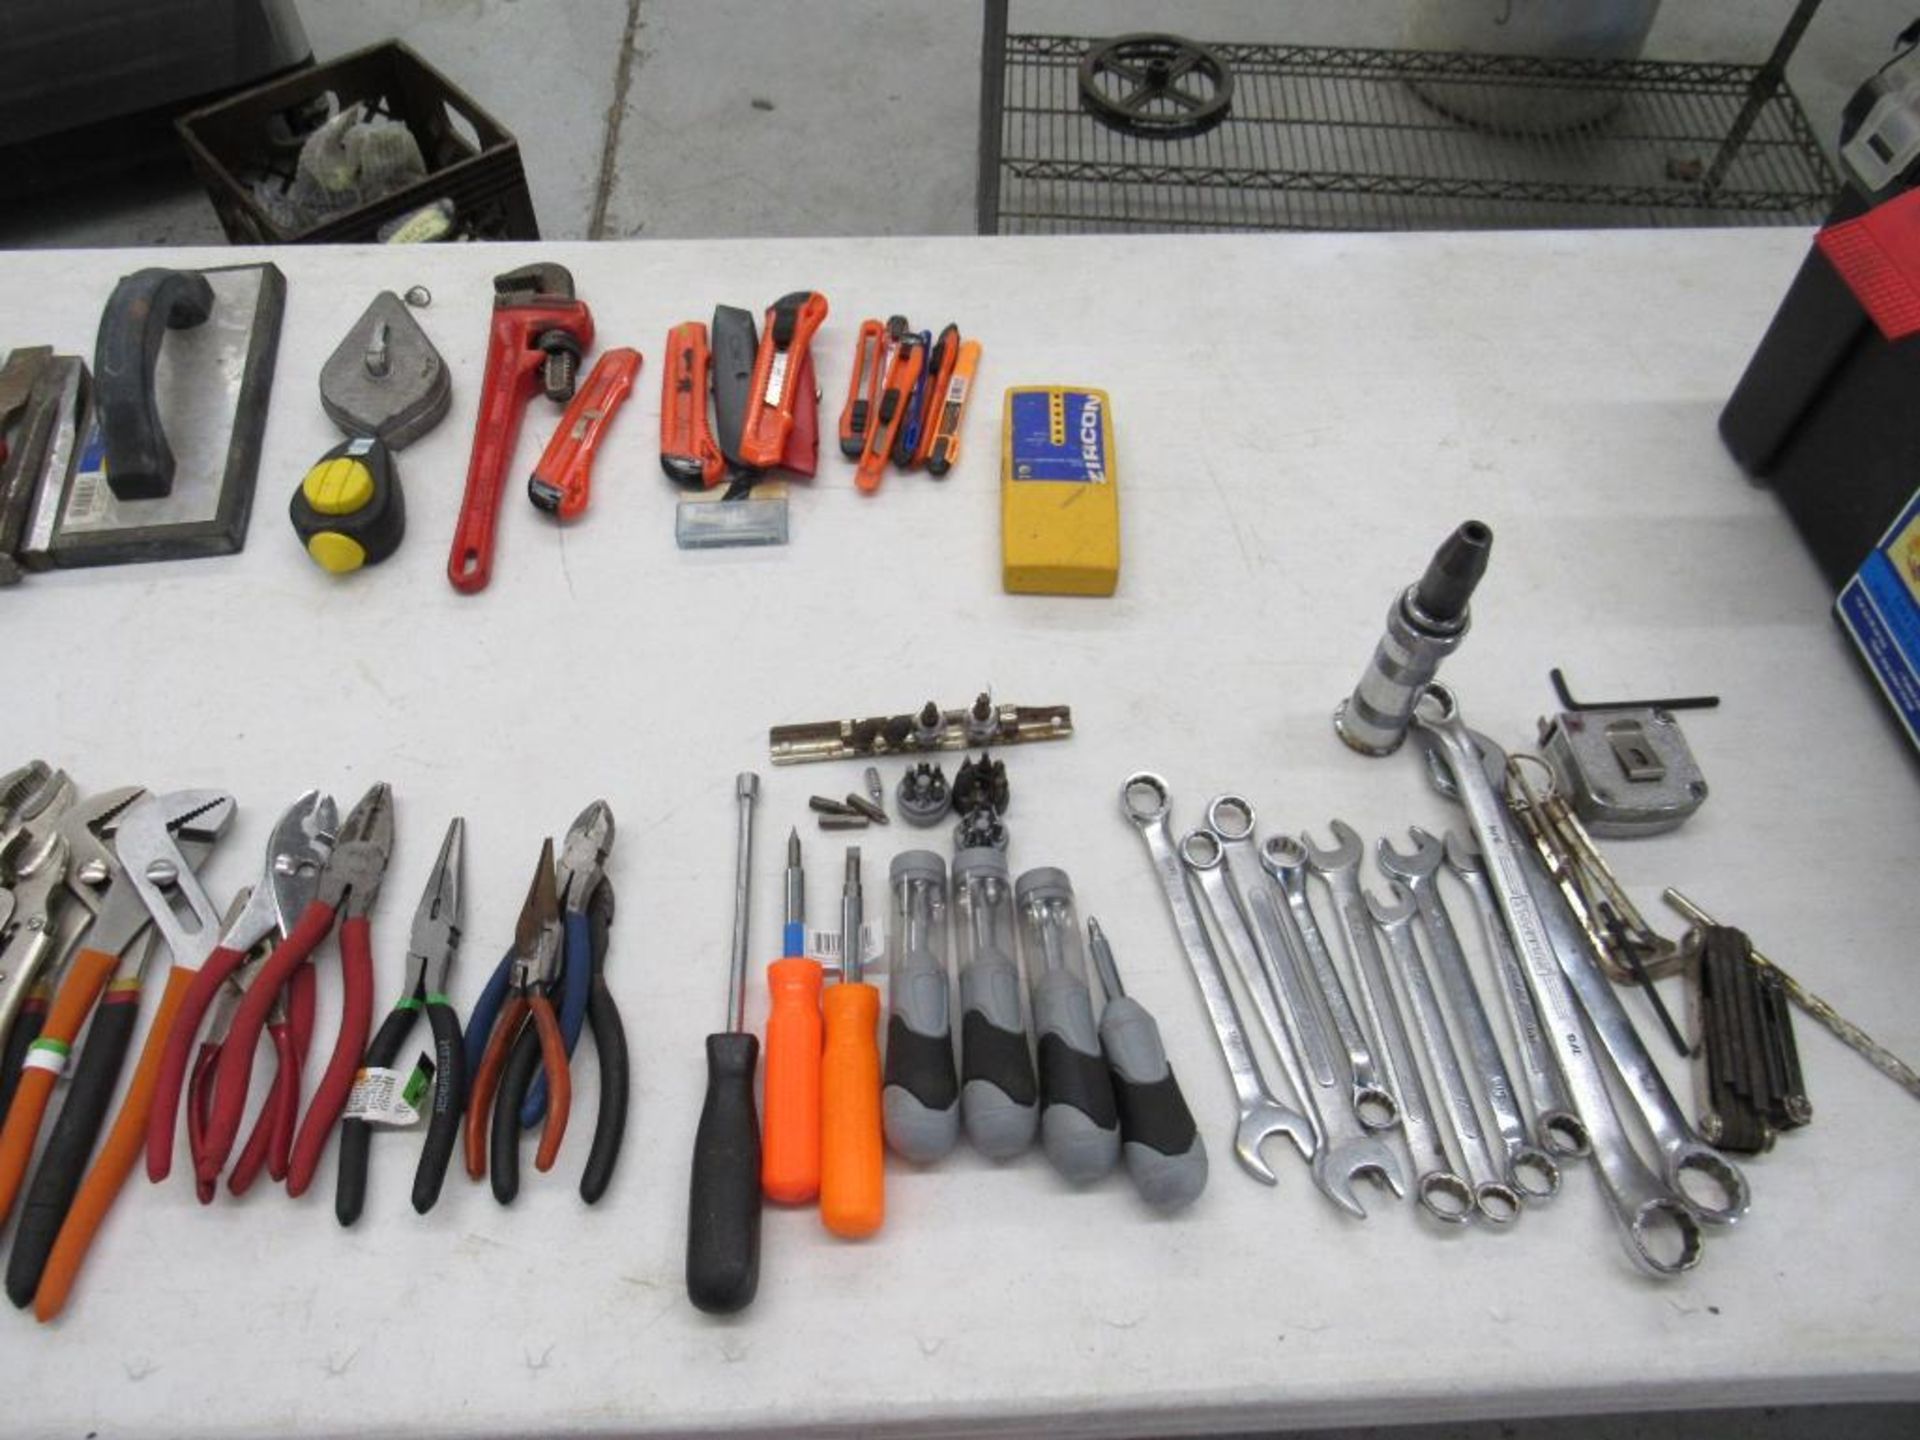 LOT: Assortment of Wrenches, Screw Drivers, Chanel Locks, Scrapers, Files, Brushes, Box Cutters - Image 4 of 7